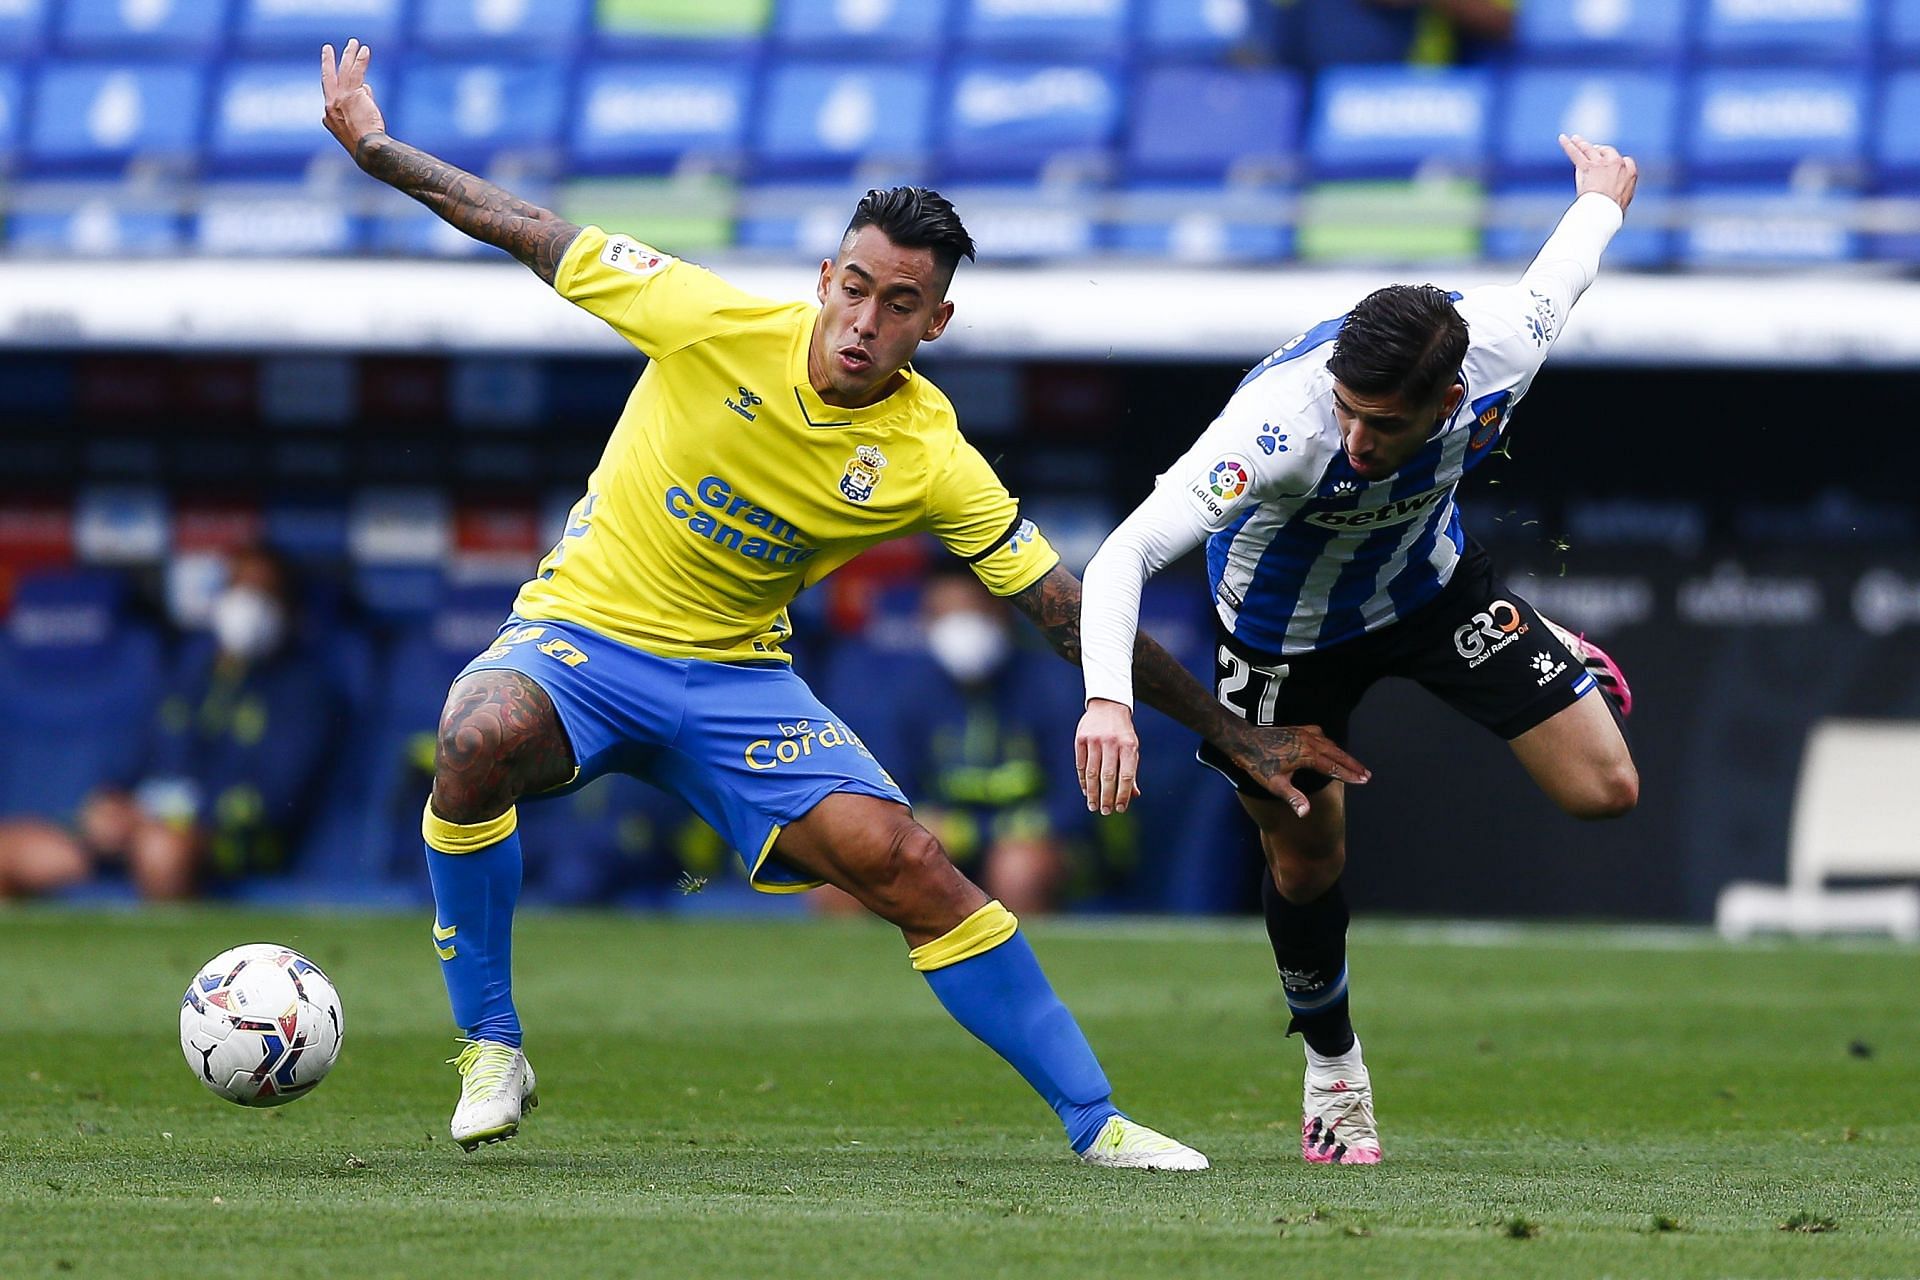 Las Palmas will be looking to climb up the table